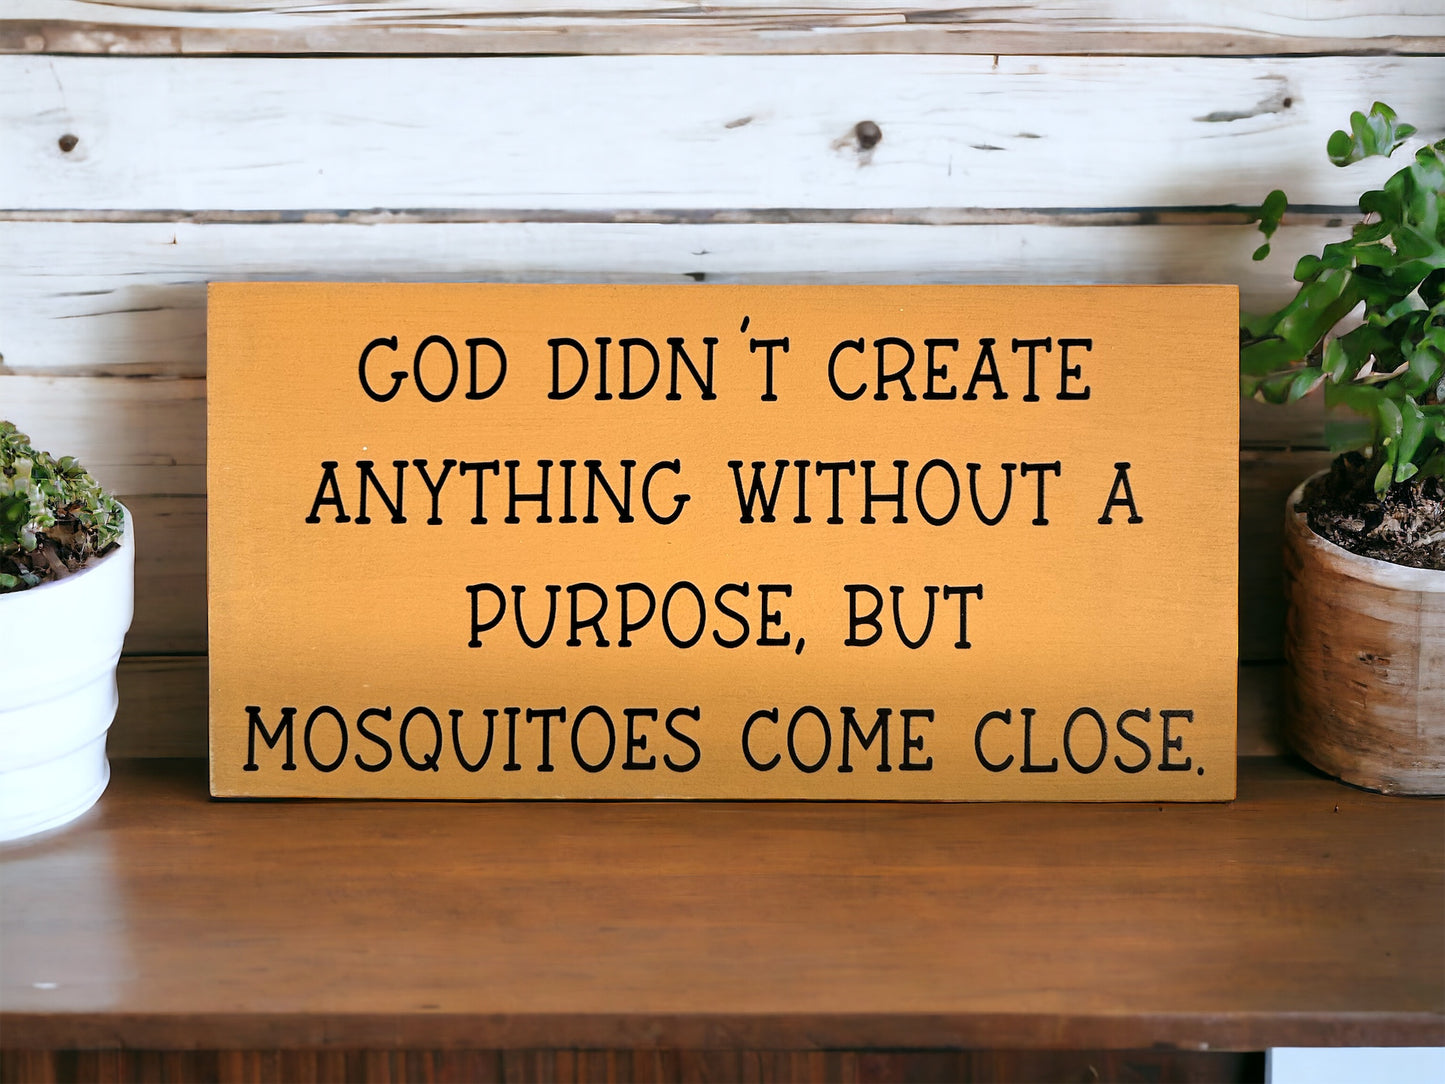 Mosquitoes Have No Purpose- Funny Rustic Wood Sign